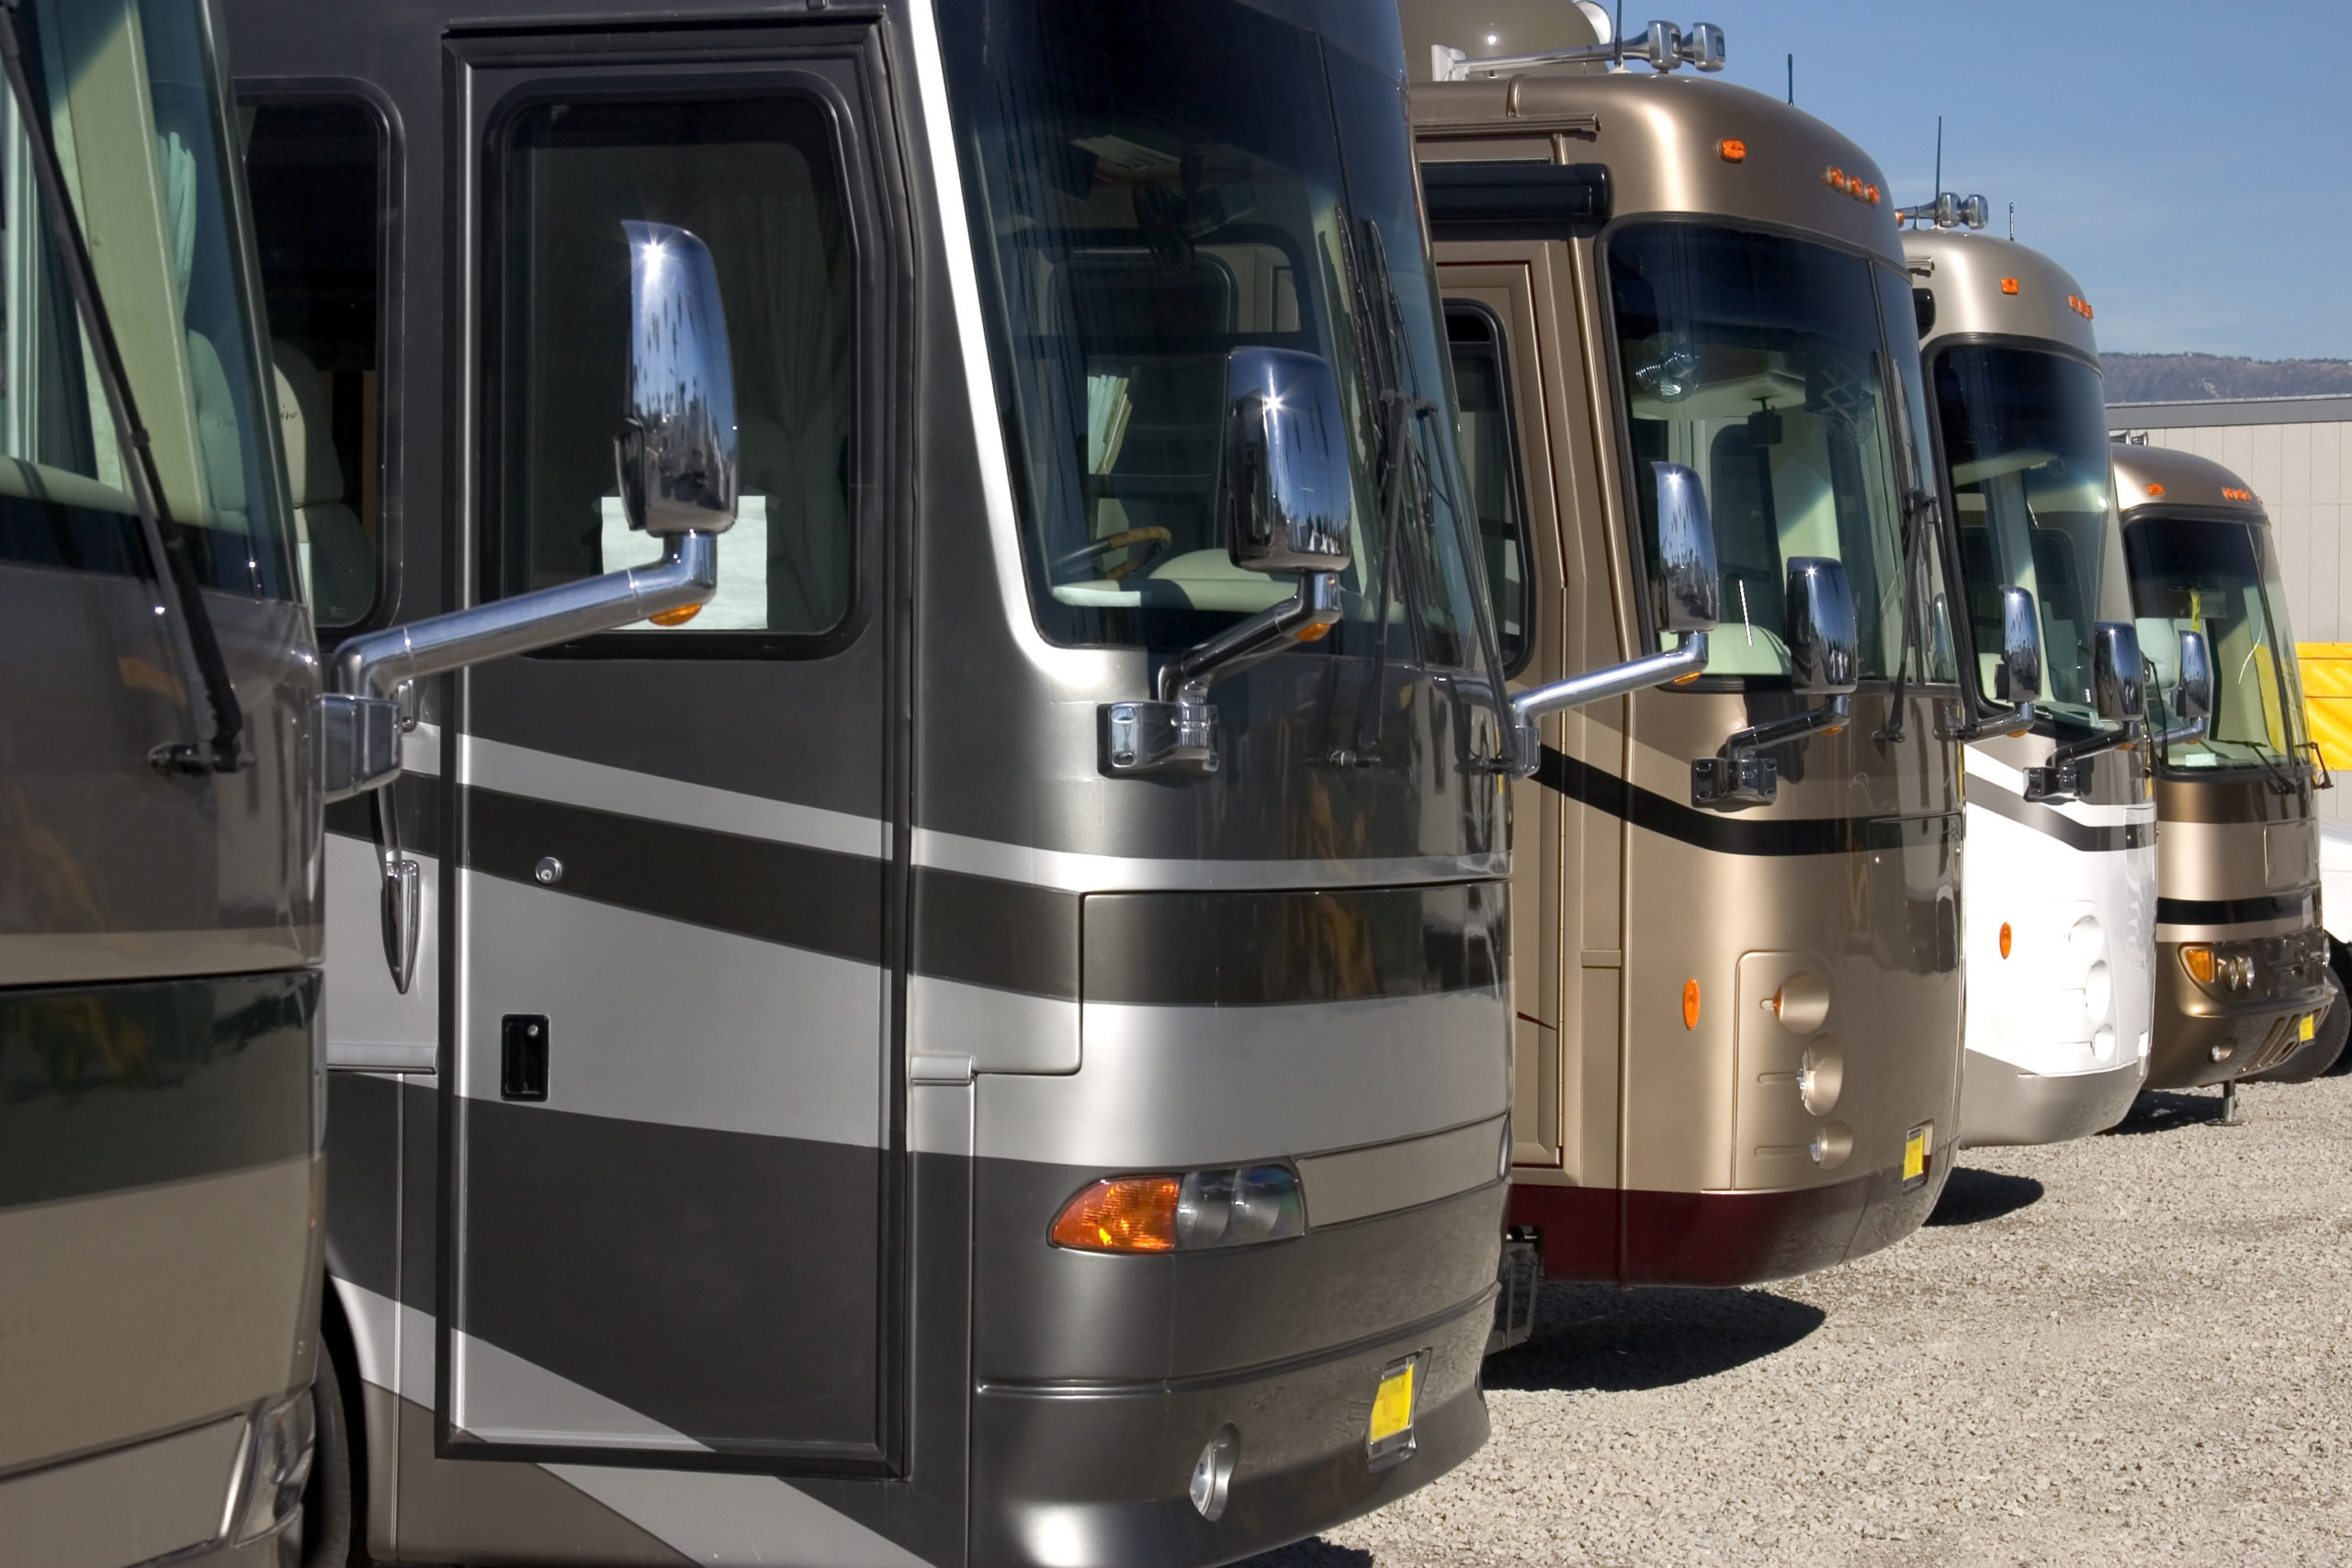 Tips for Buying a Used RV